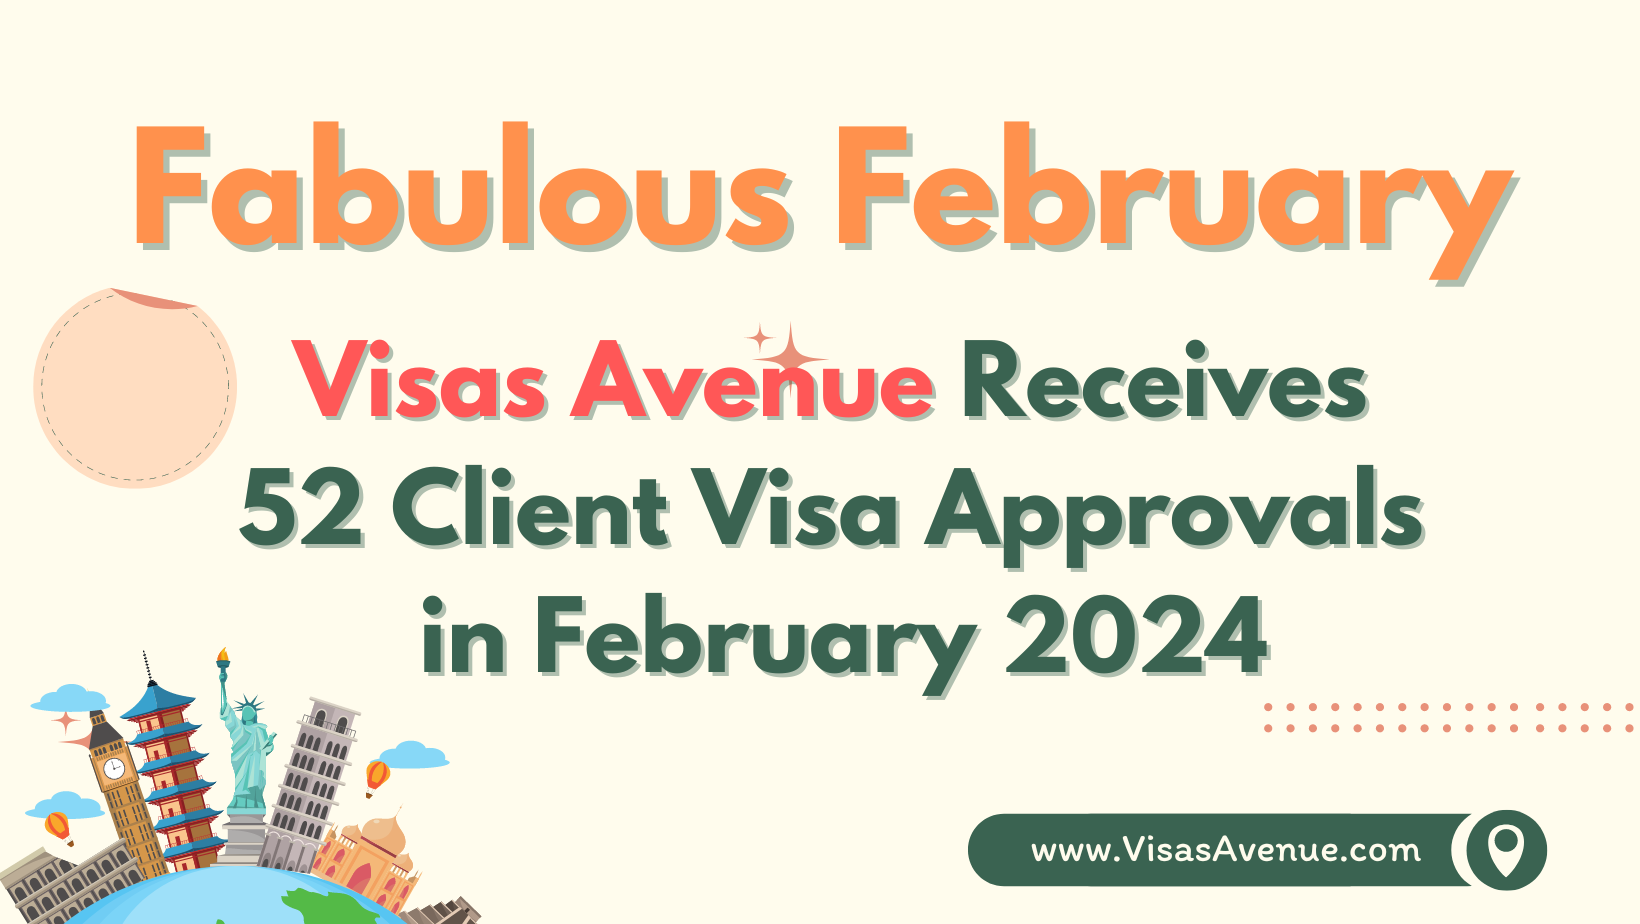 Visas Avenue Receives 52 Client Visa Approvals in February 2024